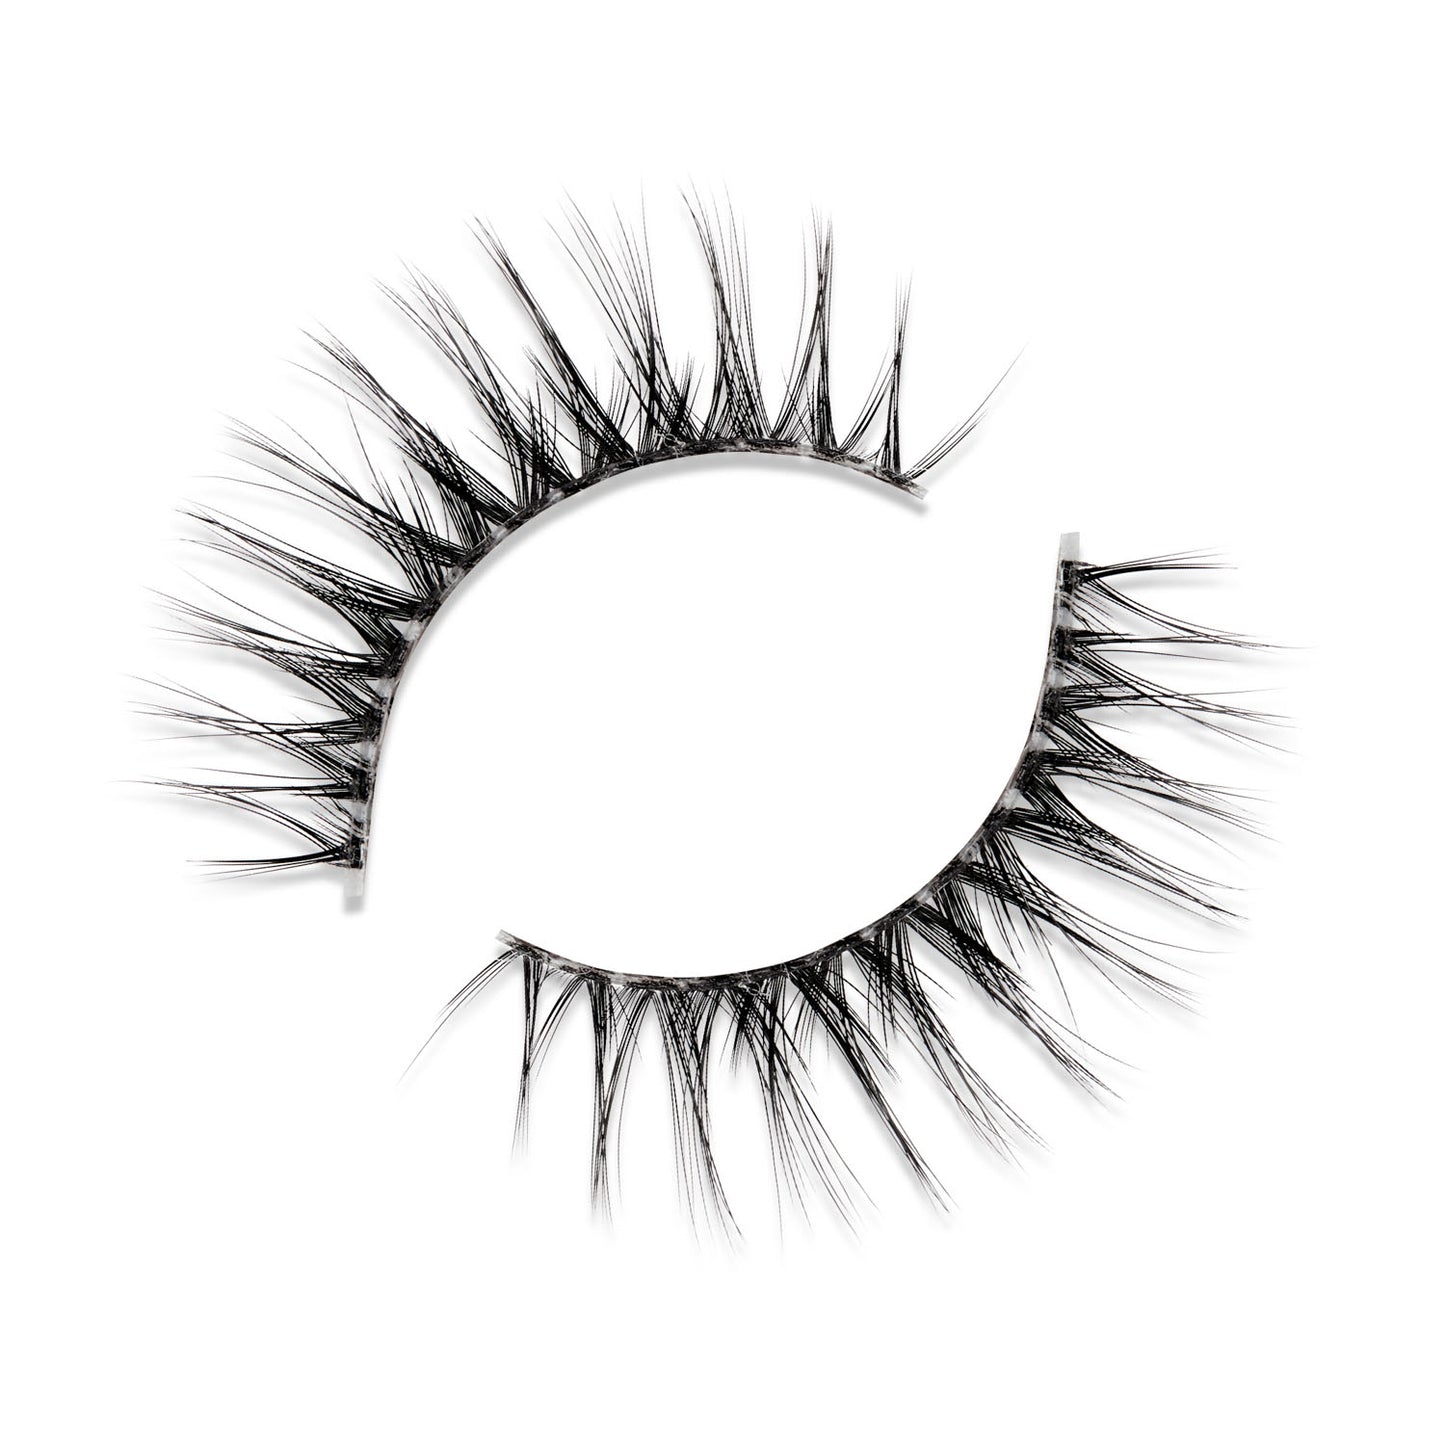 Professional (Dainty) Multi Layer Strip Lashes #D12